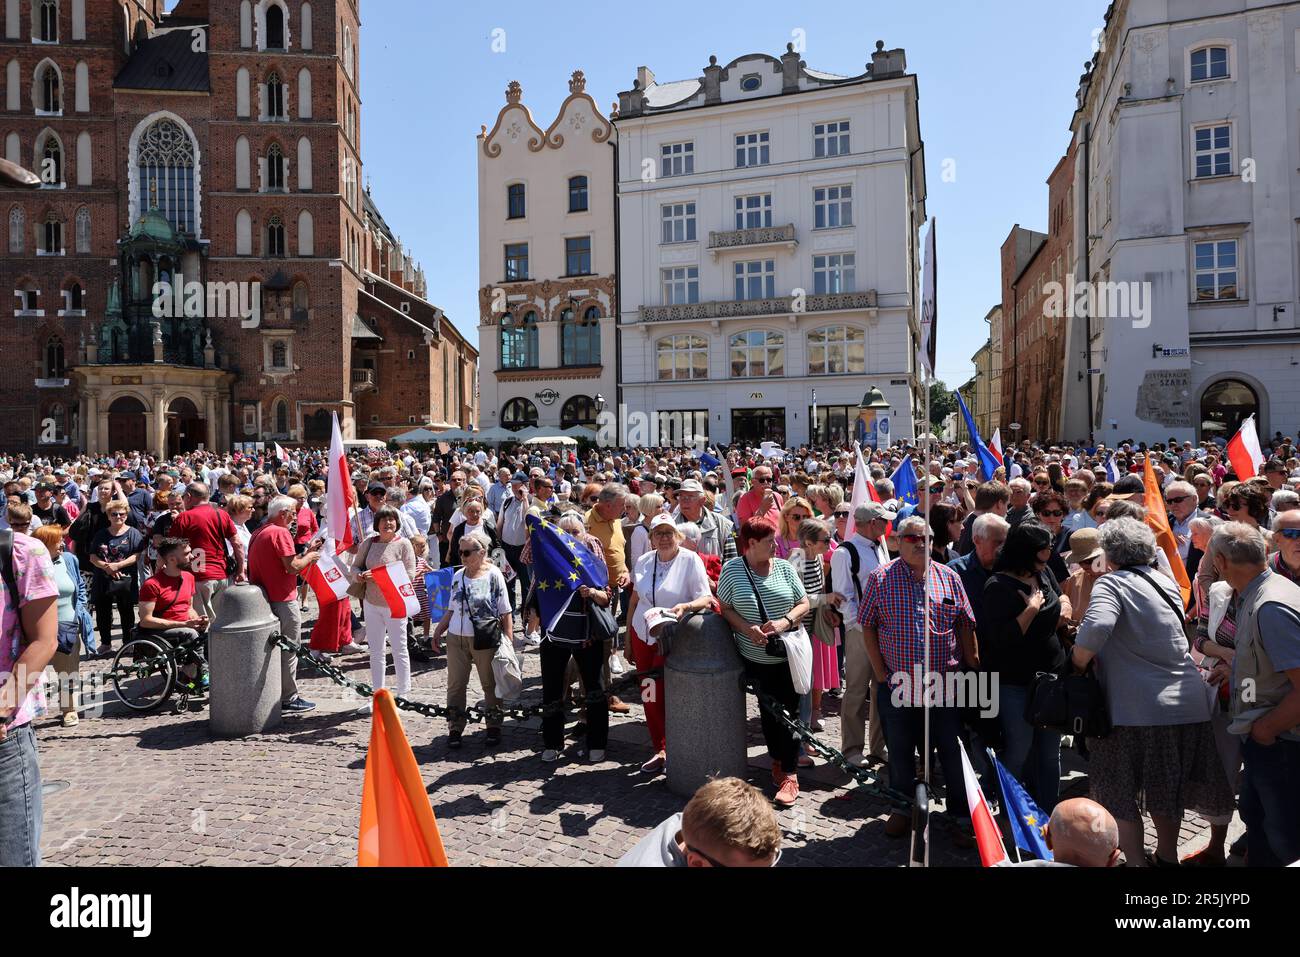 Cracow, Poland - June 4, 2023: March of freedom, march in defense of democracy, Krakow supports the great march in Warsaw. Stock Photo